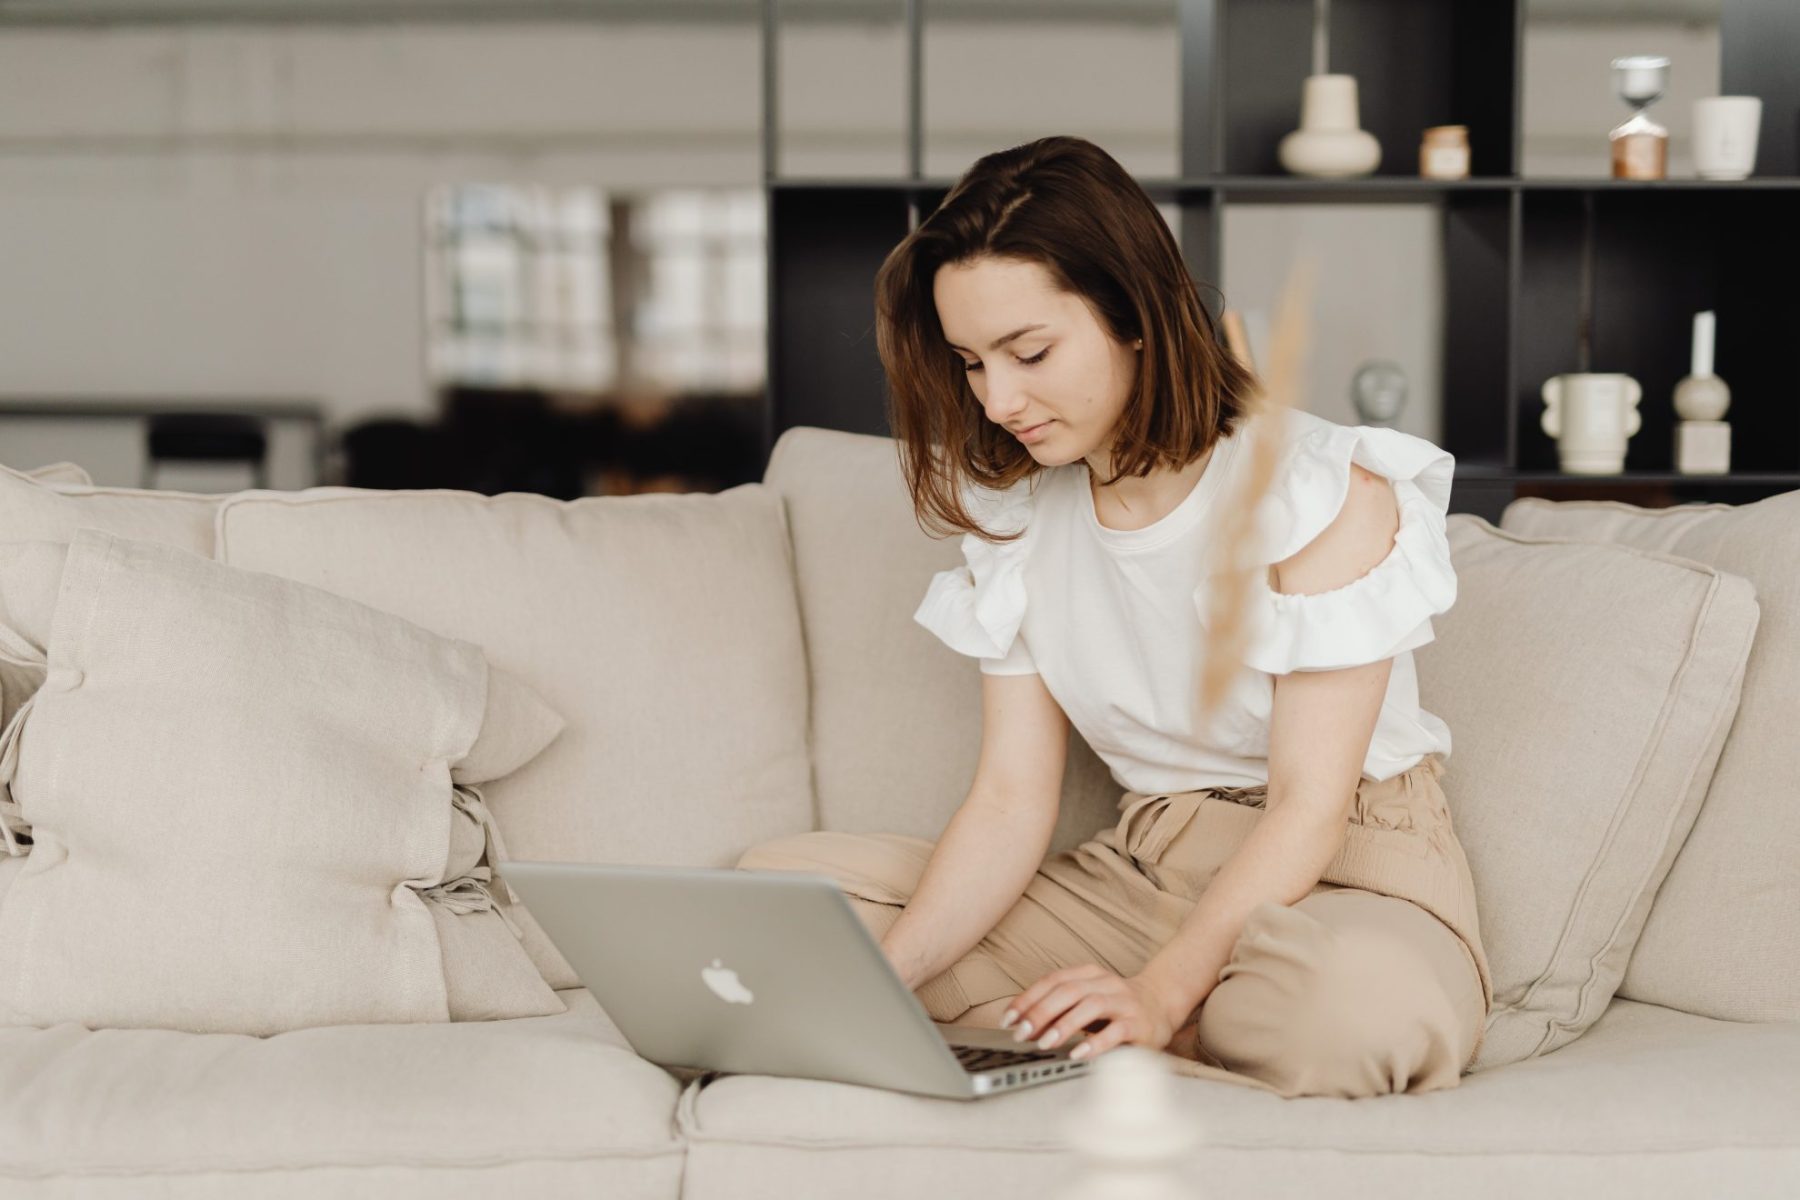 Woman in a white top and tan pants using work from home tools on her computer.